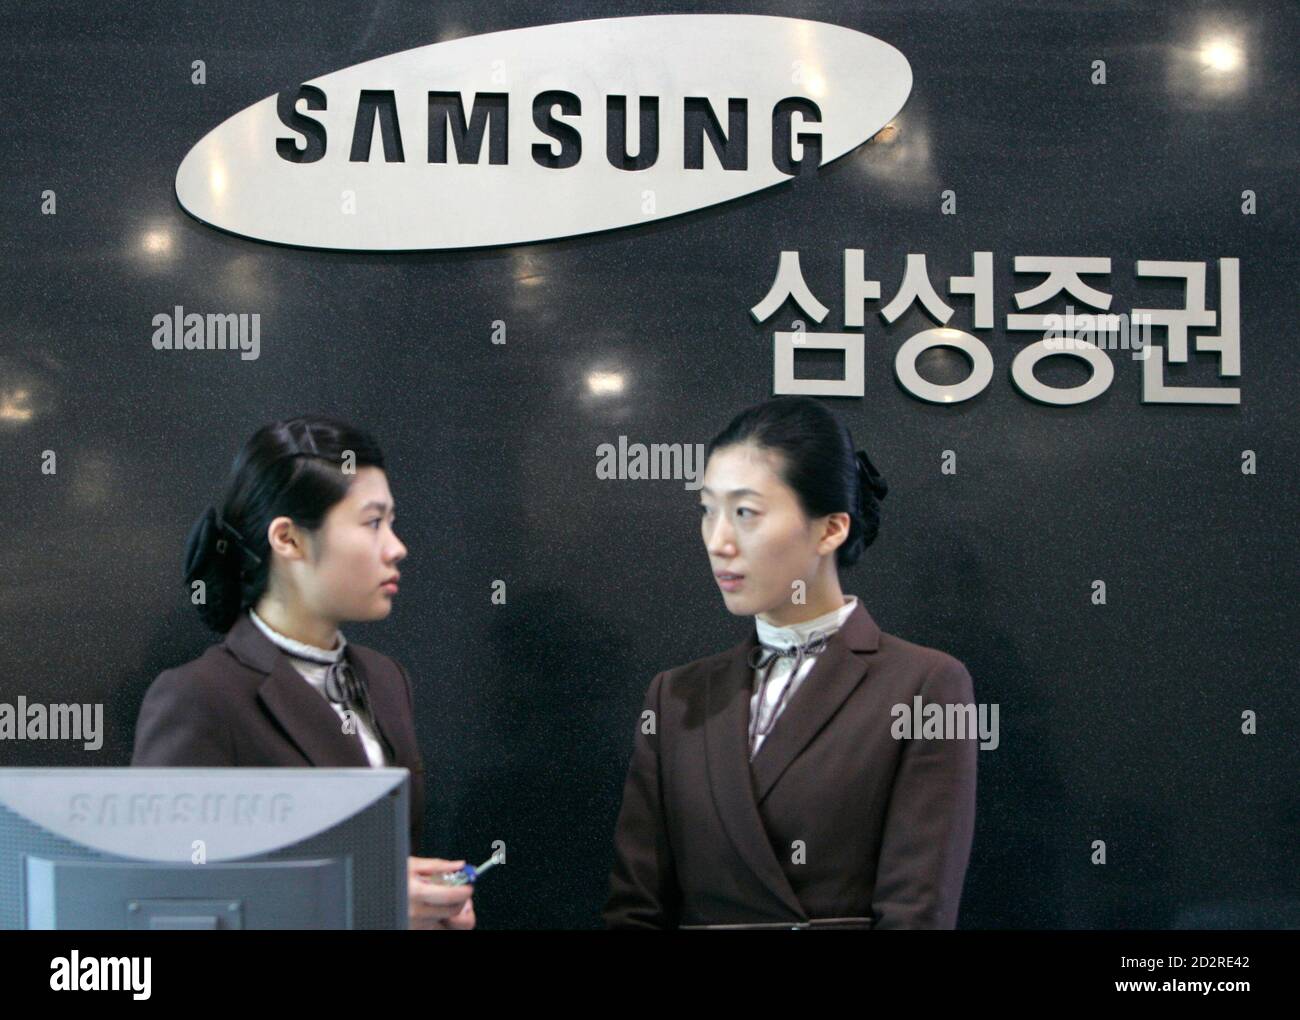 Employees of Samsung Securities talk in front of its logo at the unit's headquarters in Seoul November 30, 2007. South Korean prosecutors probing corruption at the Samsung Group raided its brokerage unit Samsung Securities on Friday and did not rule out further search and seizures at Samsung offices, an official said.  REUTERS/Jo Yong-Hak (SOUTH KOREA) Stock Photo